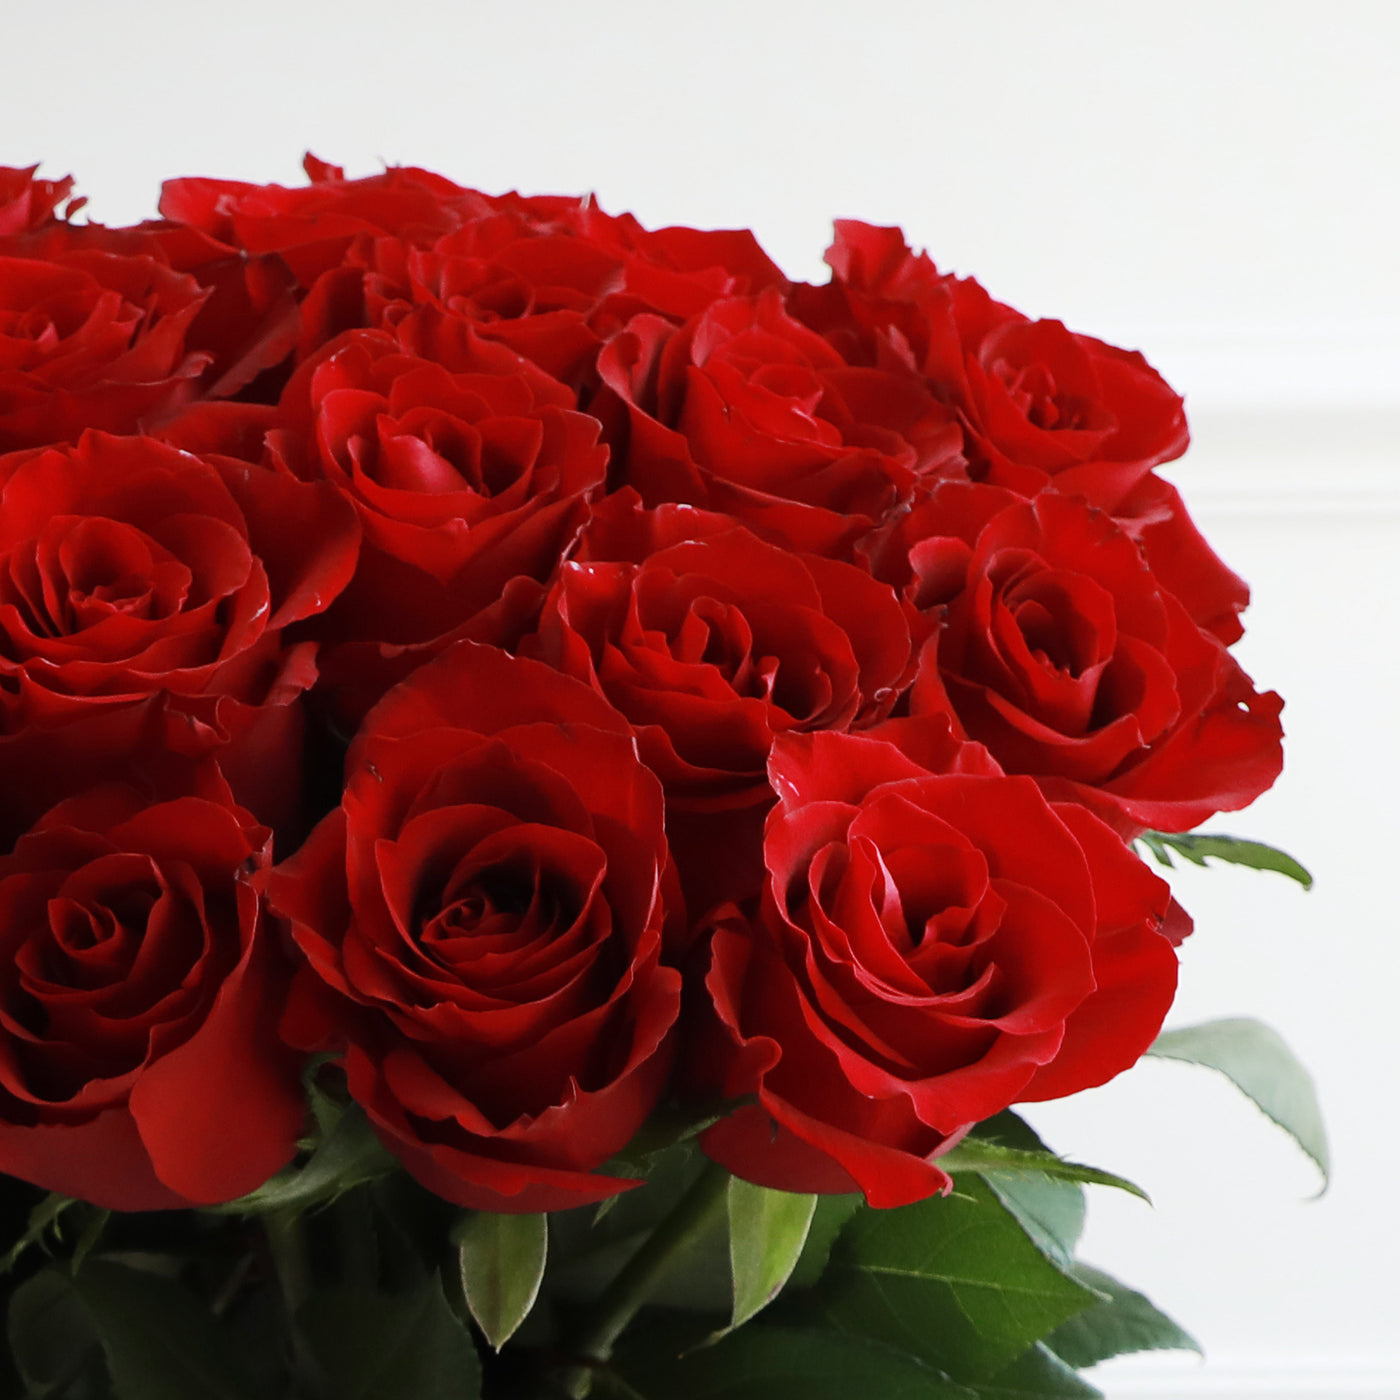 A Bunch of Single Red Roses